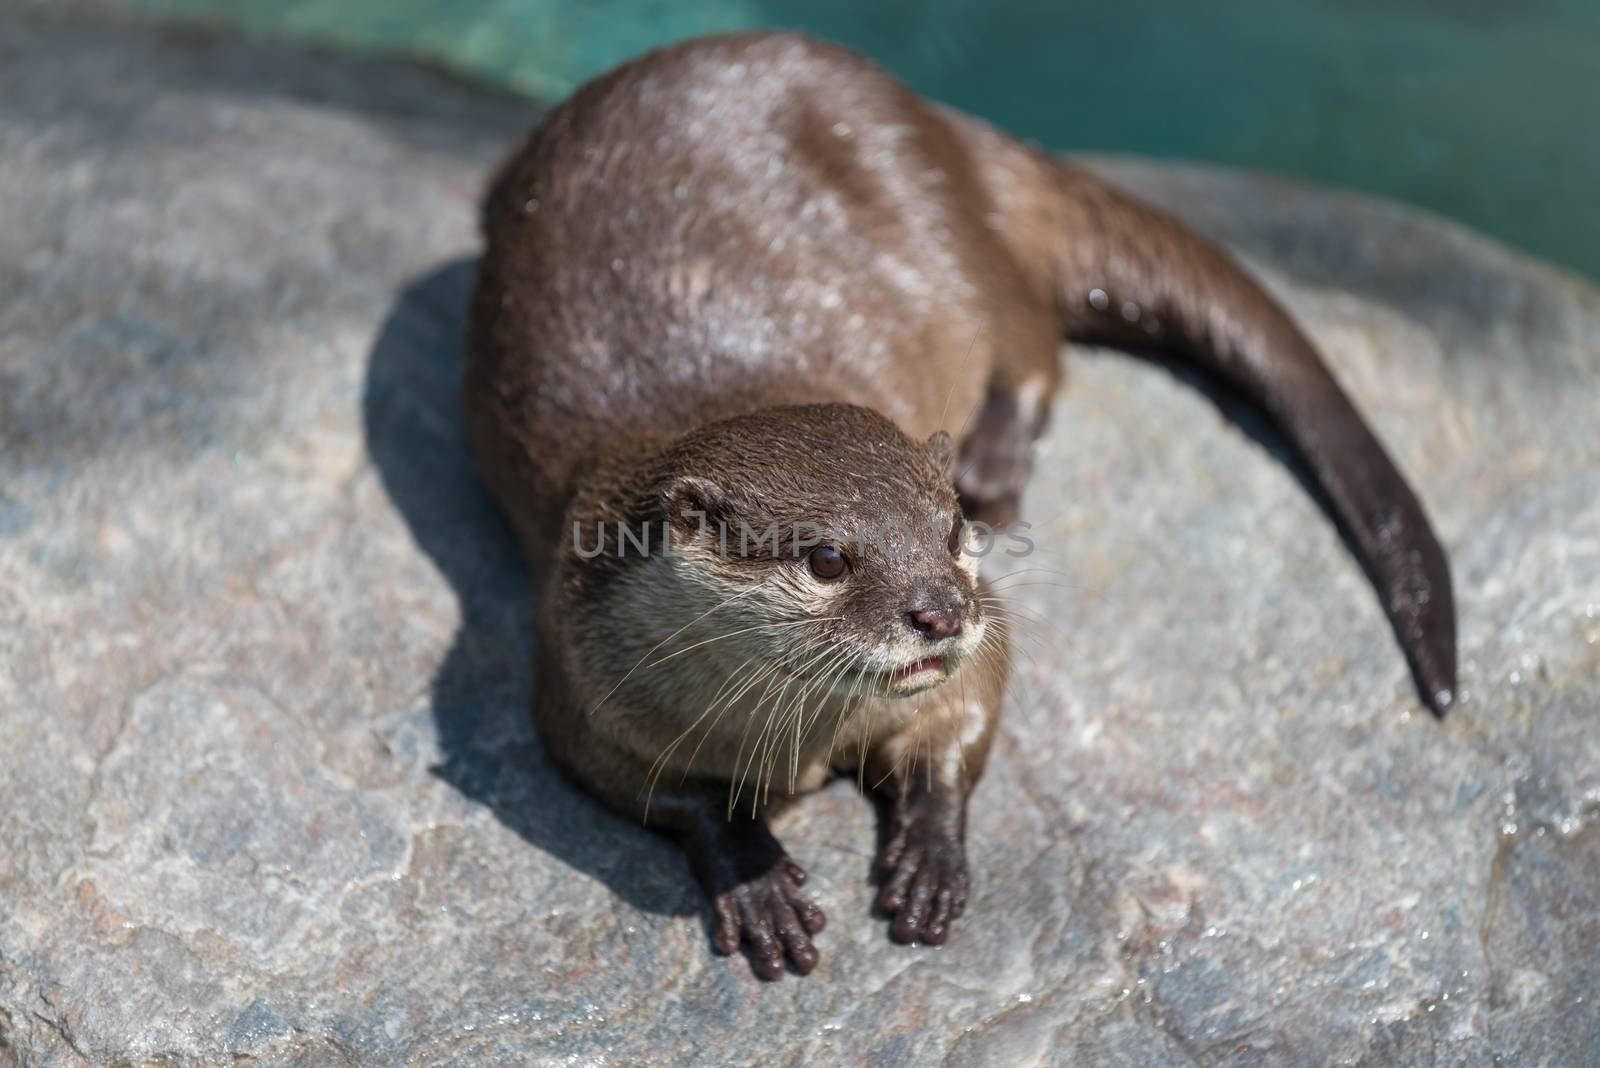 A cute river otter sitting on top of a rock.